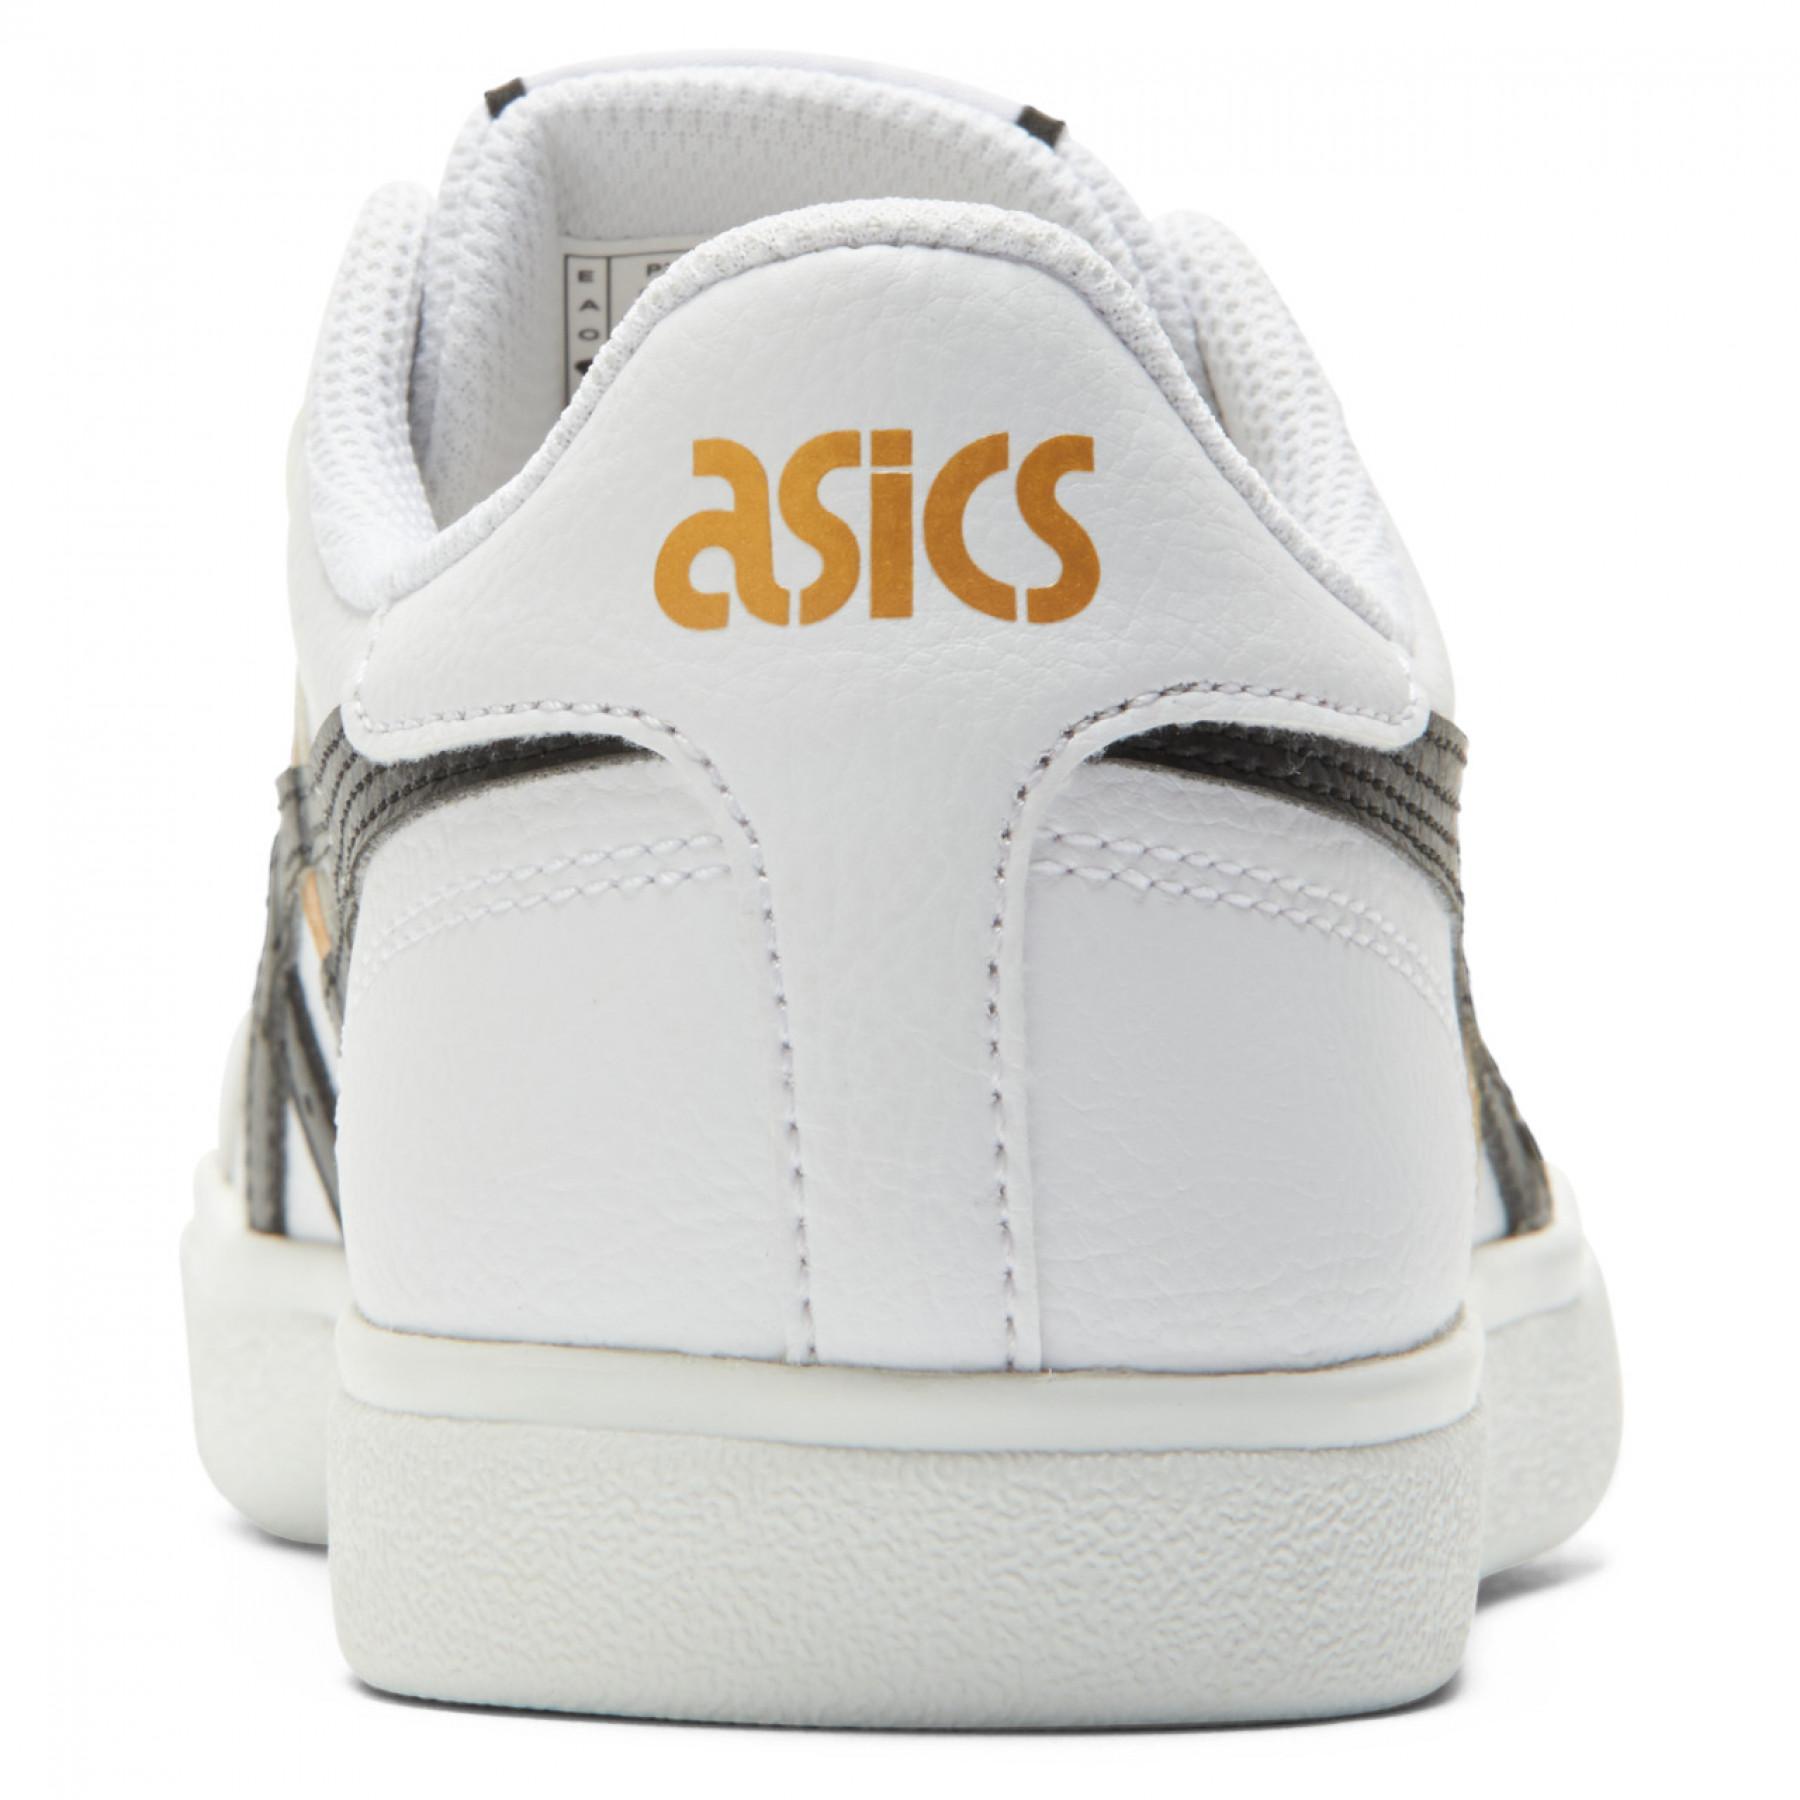 Sneakers woman Asics Classic Ct